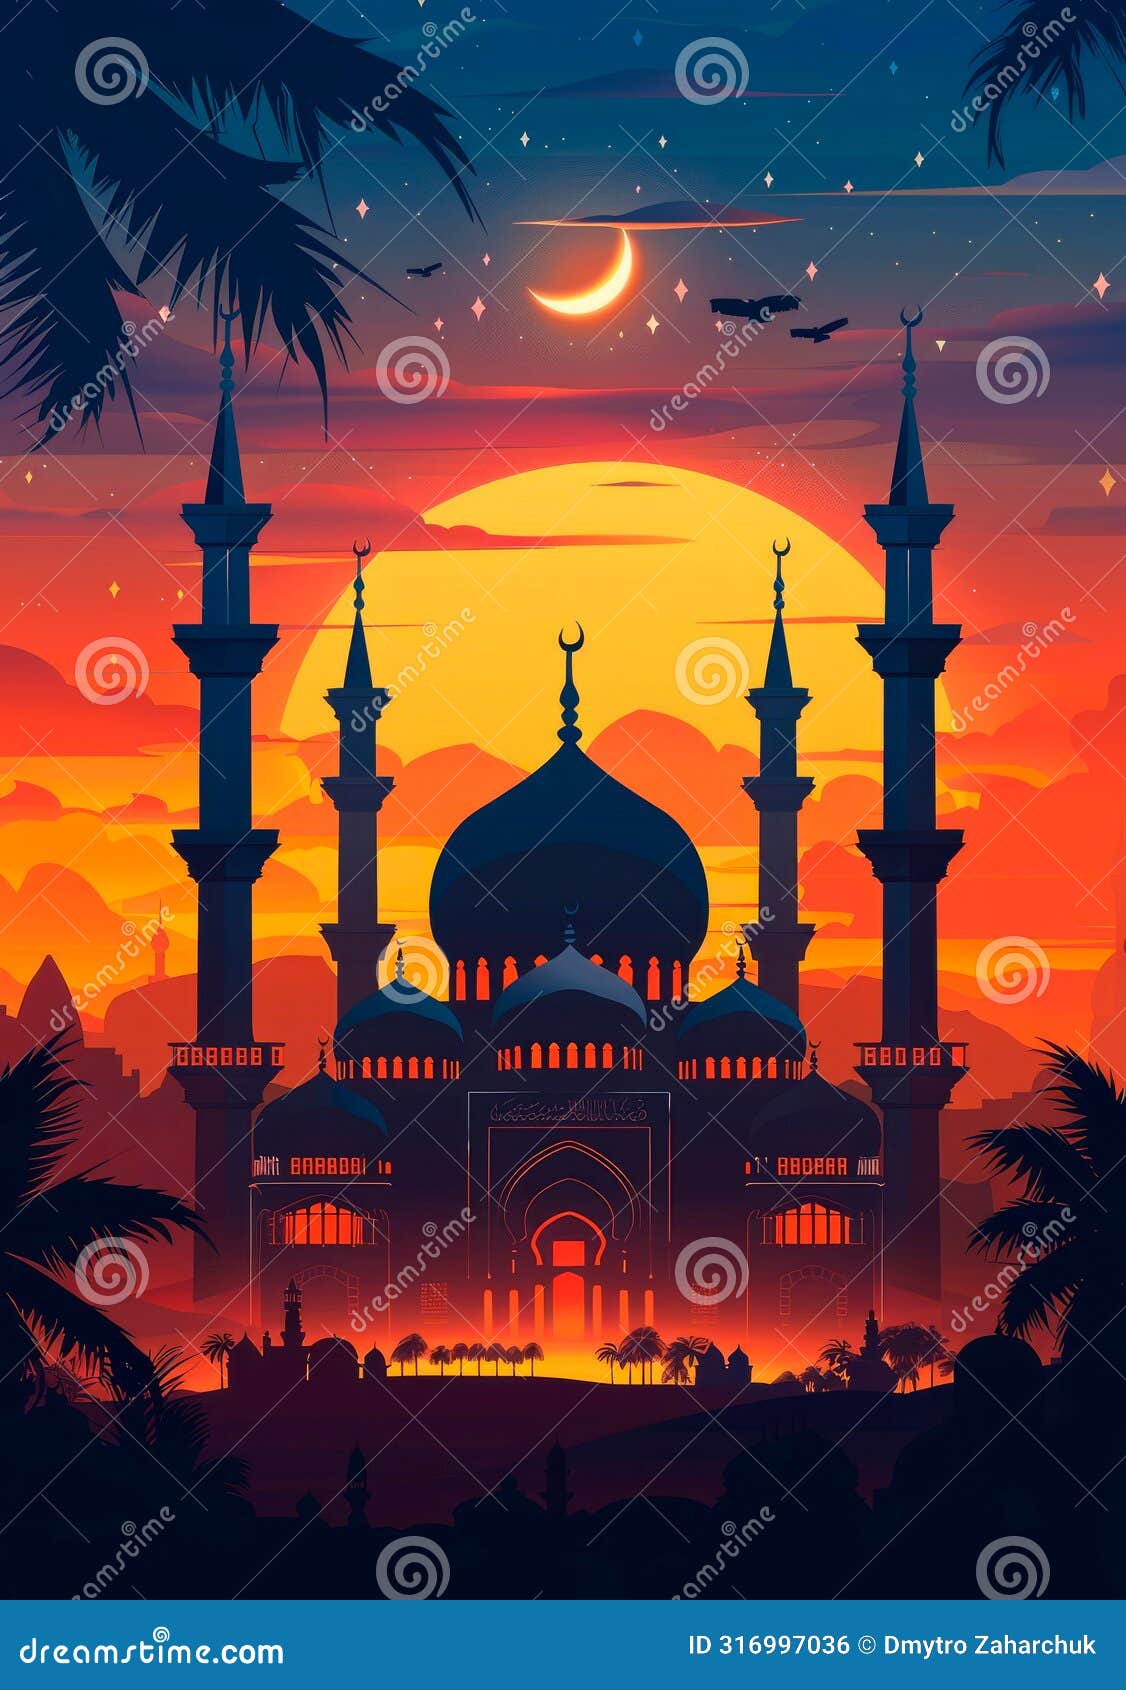 mosque at sunset, with minarets and domes adorned with eid decorations.